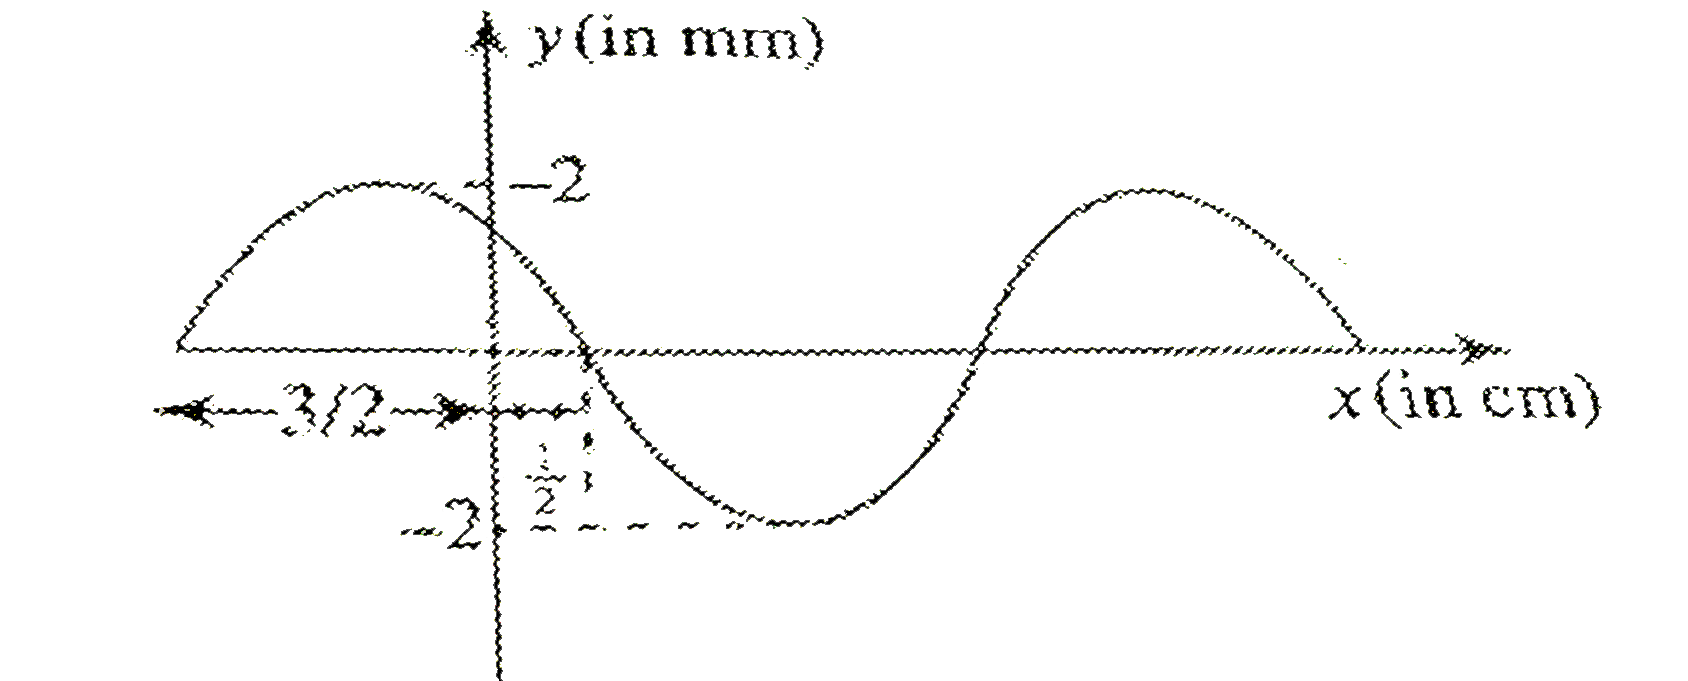 A standing wave pattern of maximum amplitude 2 mm is obtained in a string whose shape at t = 0 is represented in the graph.       If the speed of the travelling wave in the string is 5 cm/s, then find the component waves.